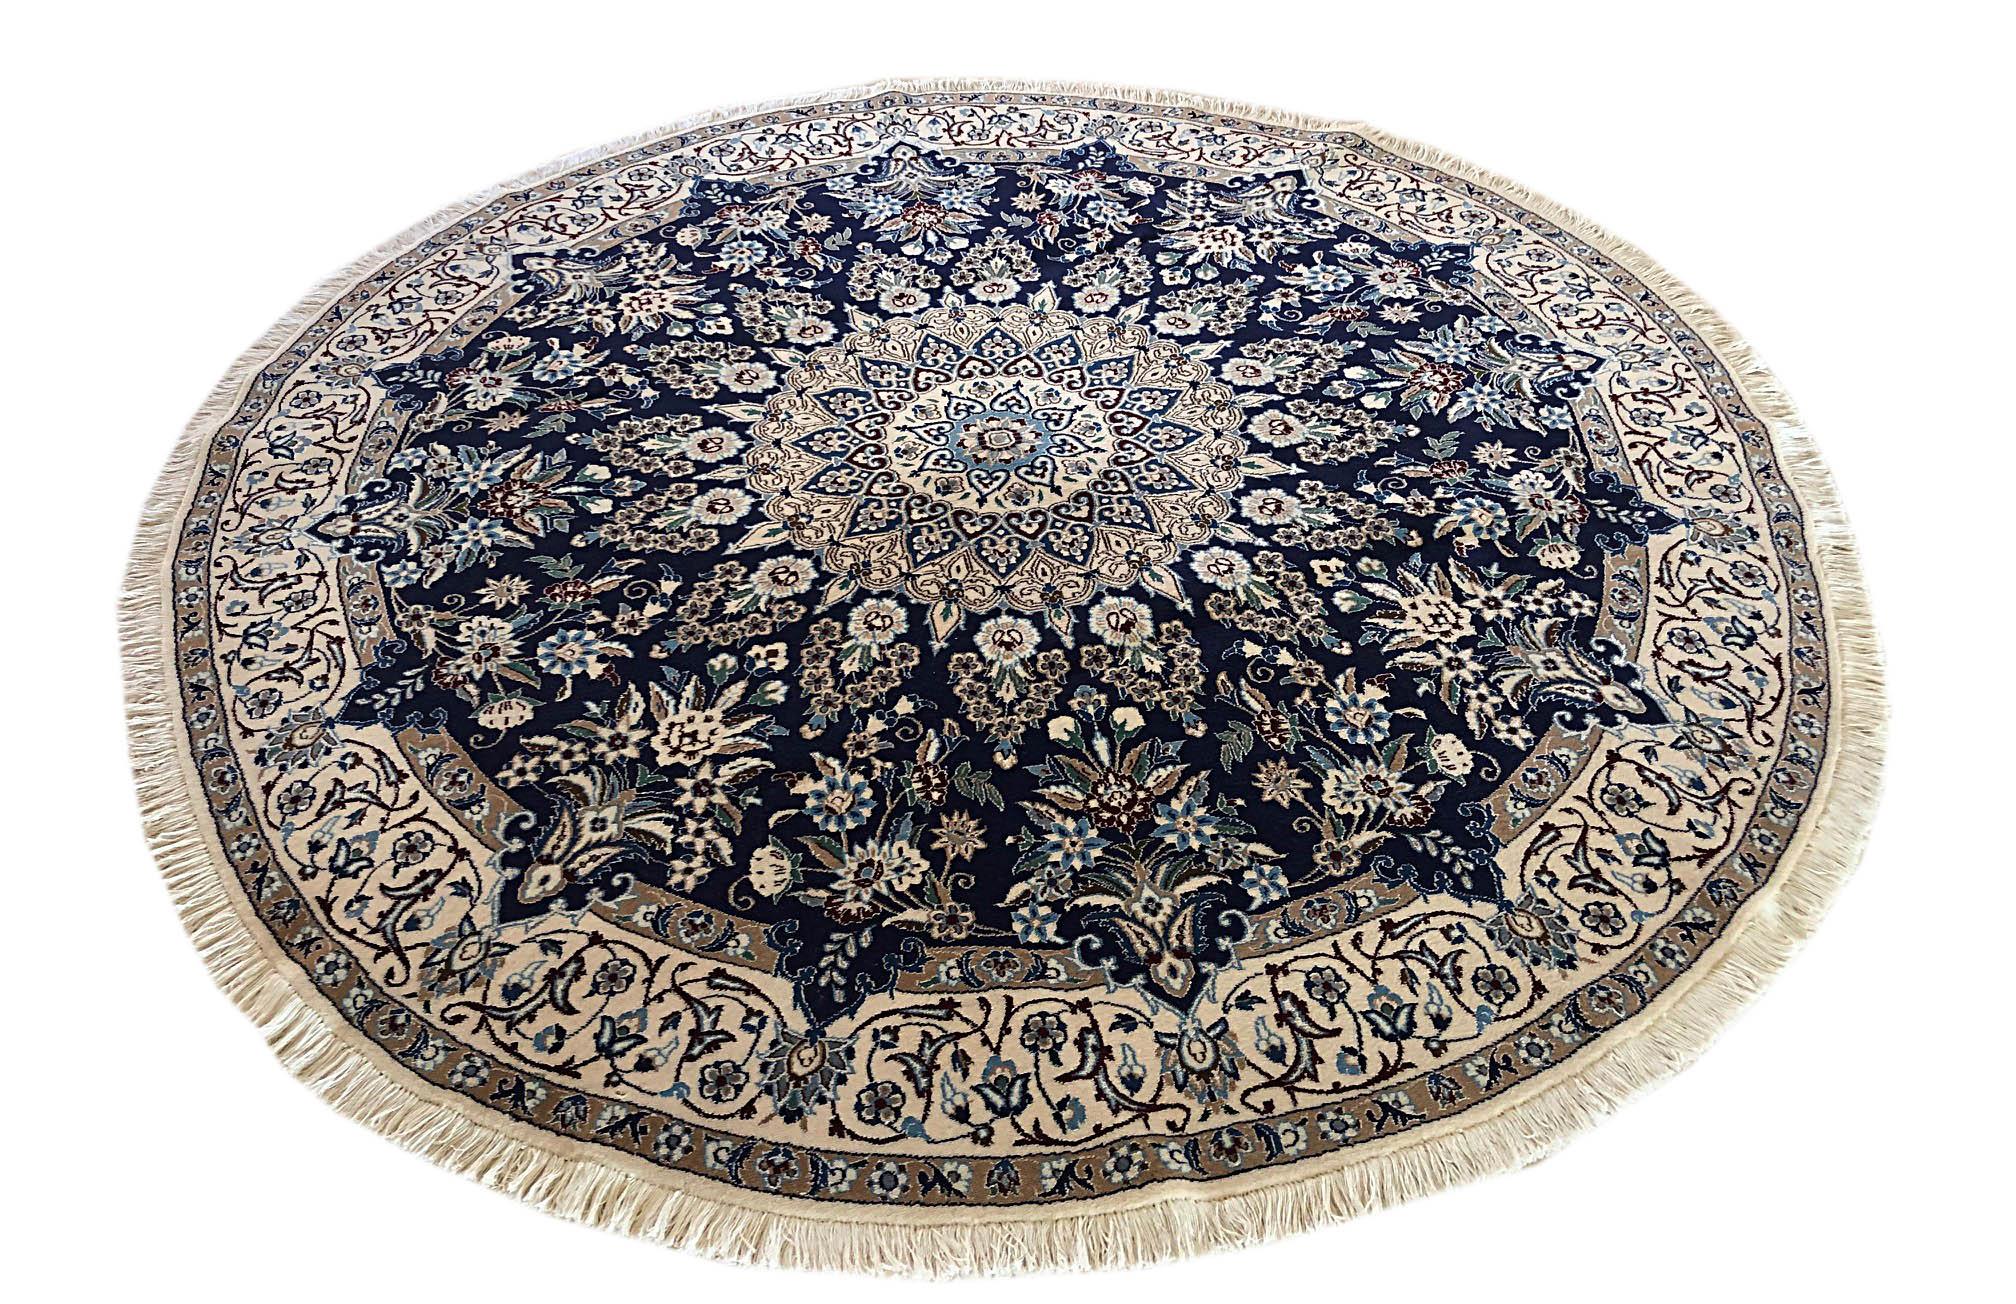 This authentic Persian round handmade Nain (9 LA) rug has wool and silk pile with cotton foundation. Nain is a city in Iran that is well known for producing Fine handmade rug. This rug has medallion floral design. The base color is dark blue and